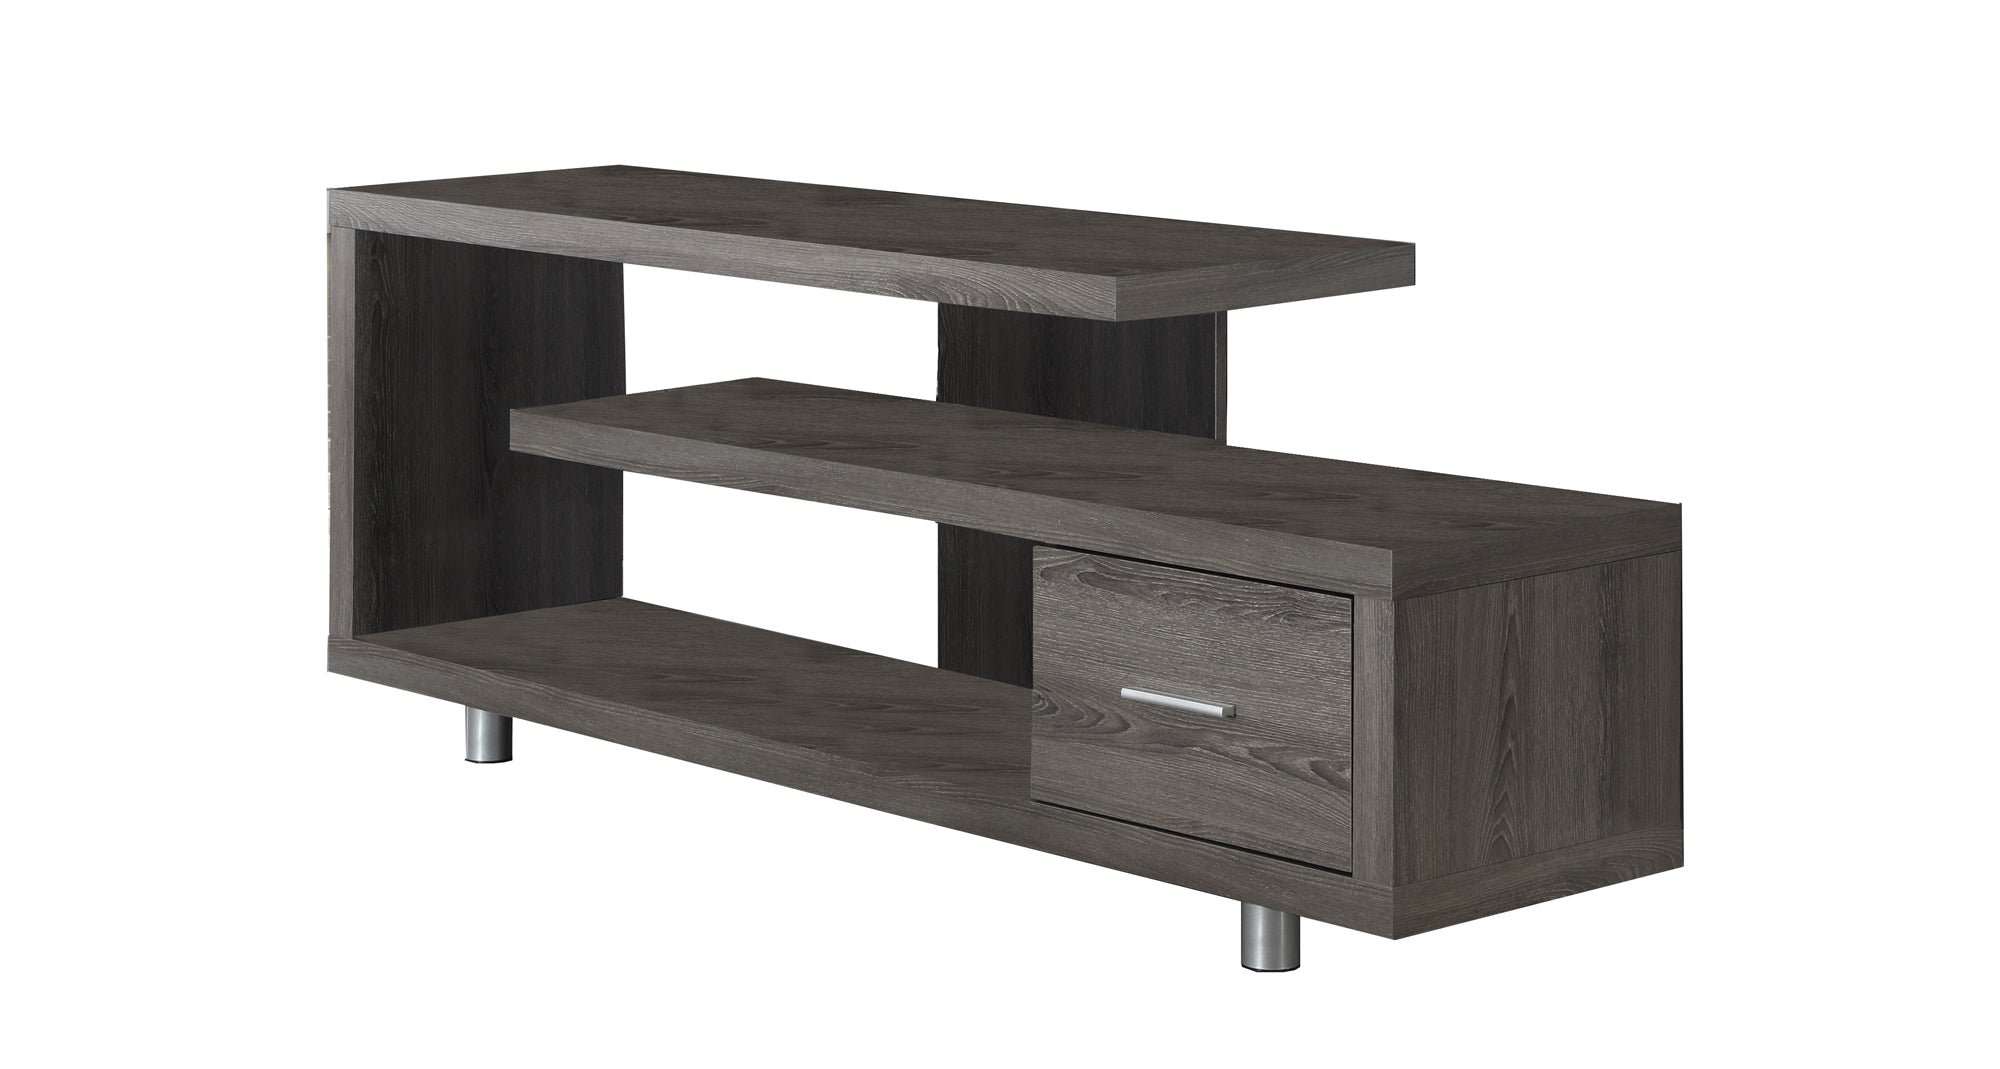 MN-692574    Tv Stand, 60 Inch, Console, Media Entertainment Center, Storage Cabinet, Living Room, Bedroom, Laminate, Metal, Dark Taupe, Contemporary, Modern